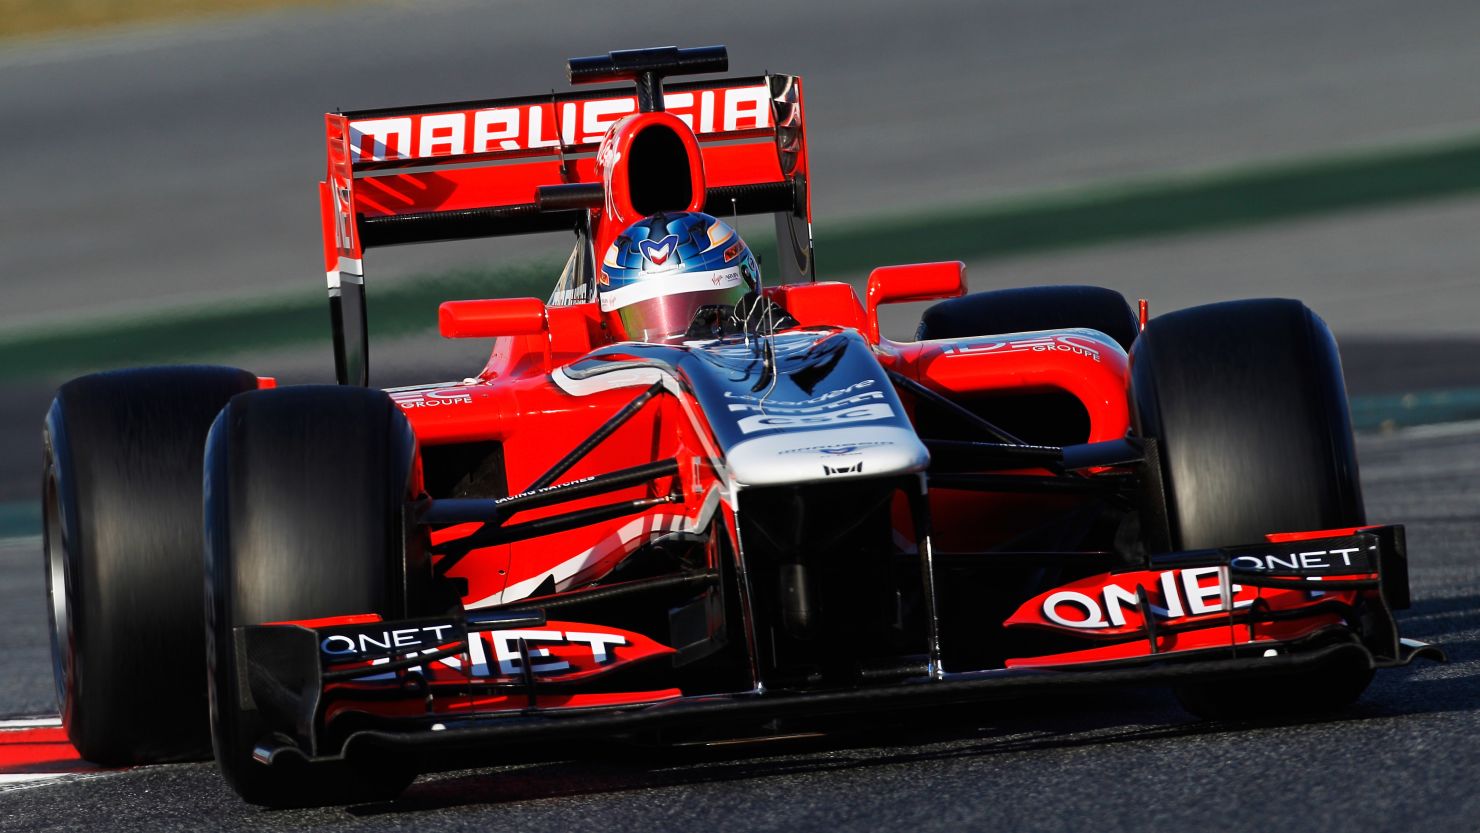 Marussia's drivers have only been able to test their 2011 car as a result of not passing the necessary crash tests.